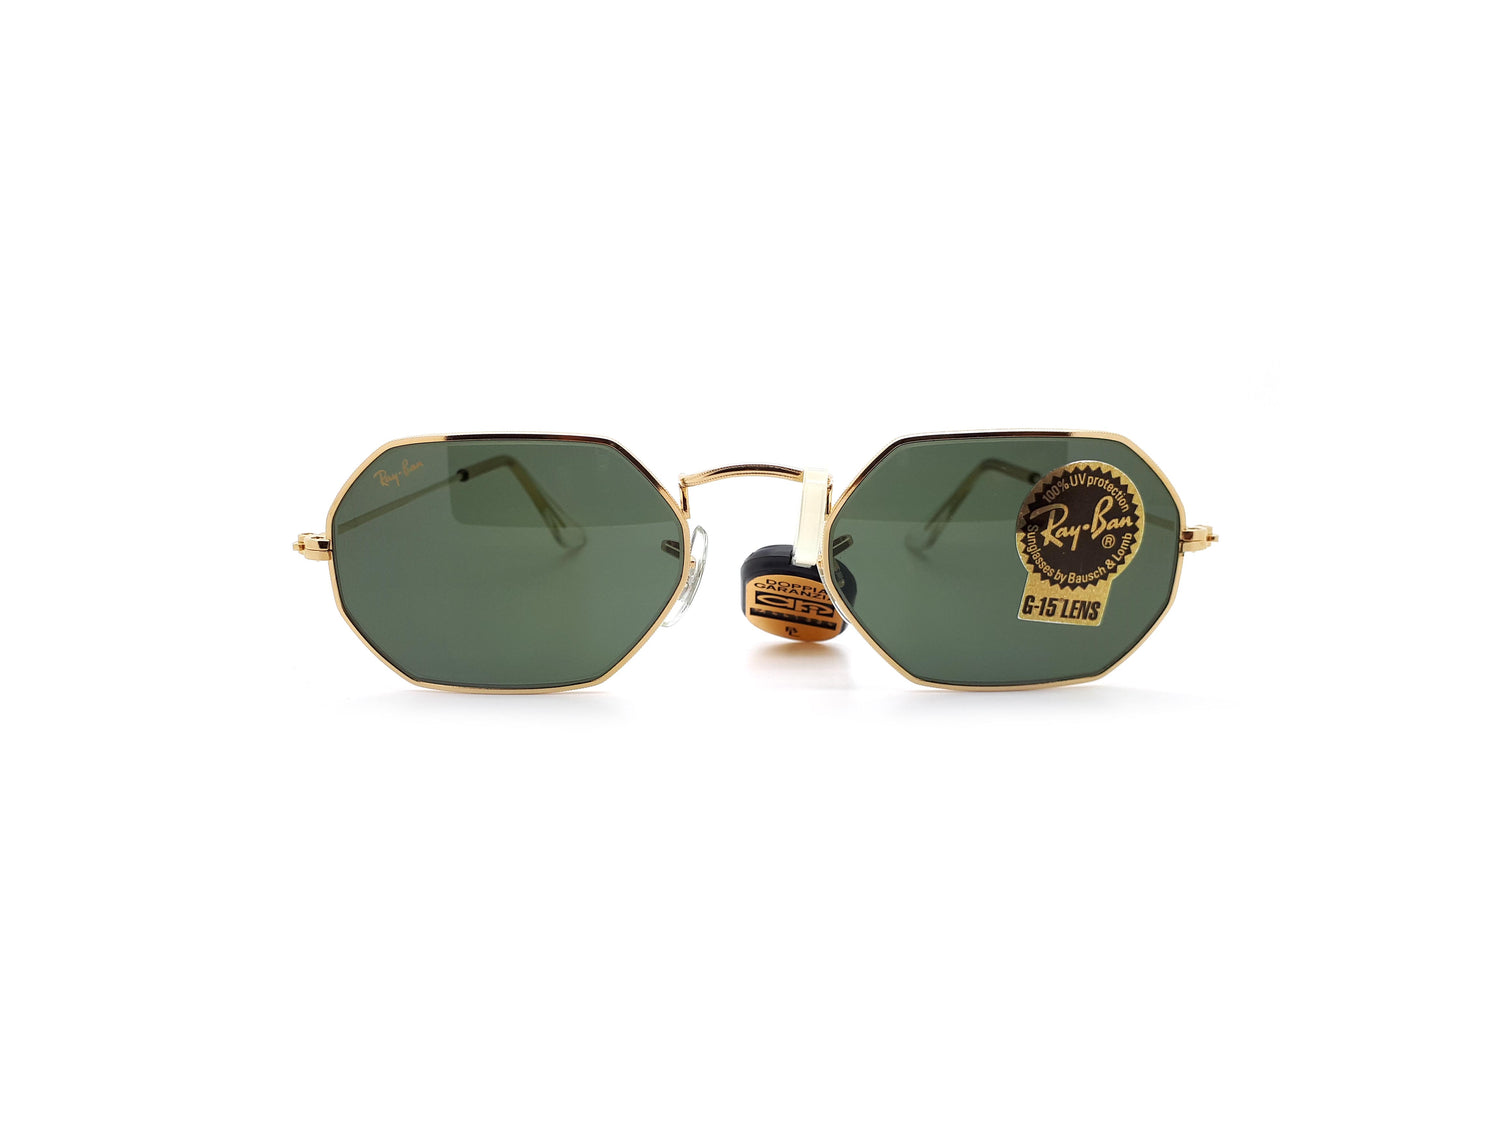 RayBan Bausch and Lomb Classic Collection VI Vintage Square 90s Sunglasses  – Ed & Sarna Vintage Eyewear